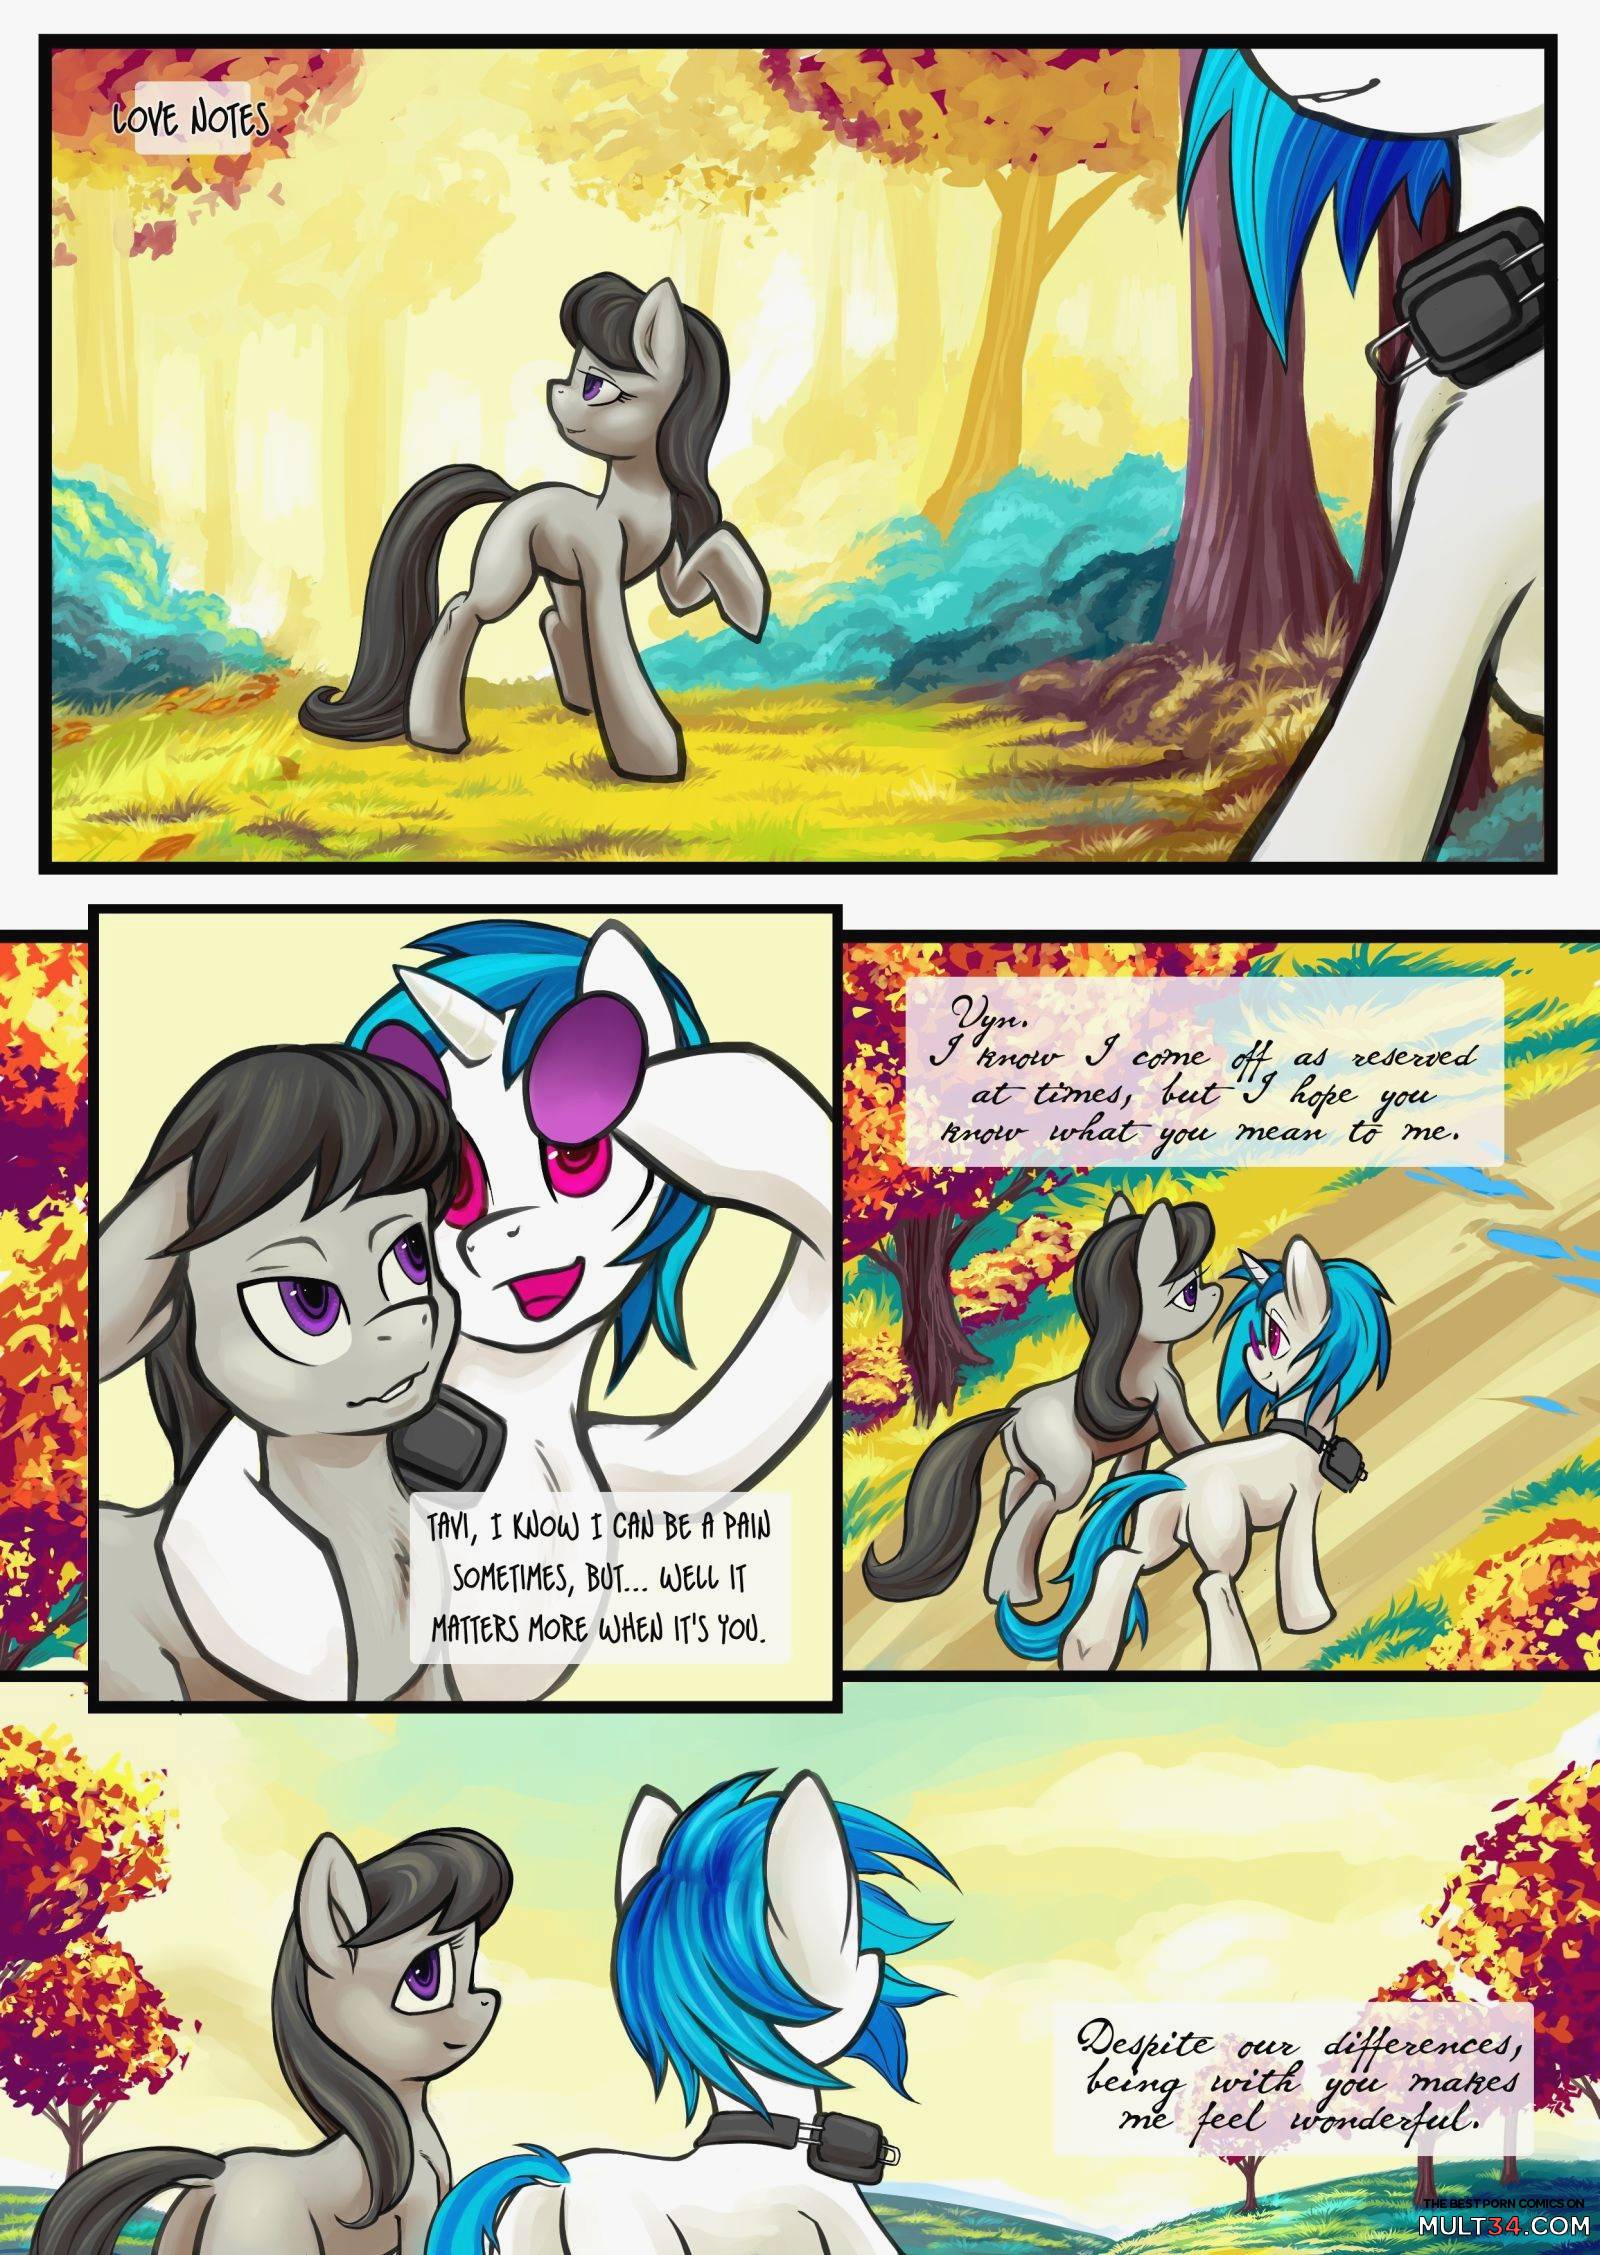 PlayPony Issue 2 page 23